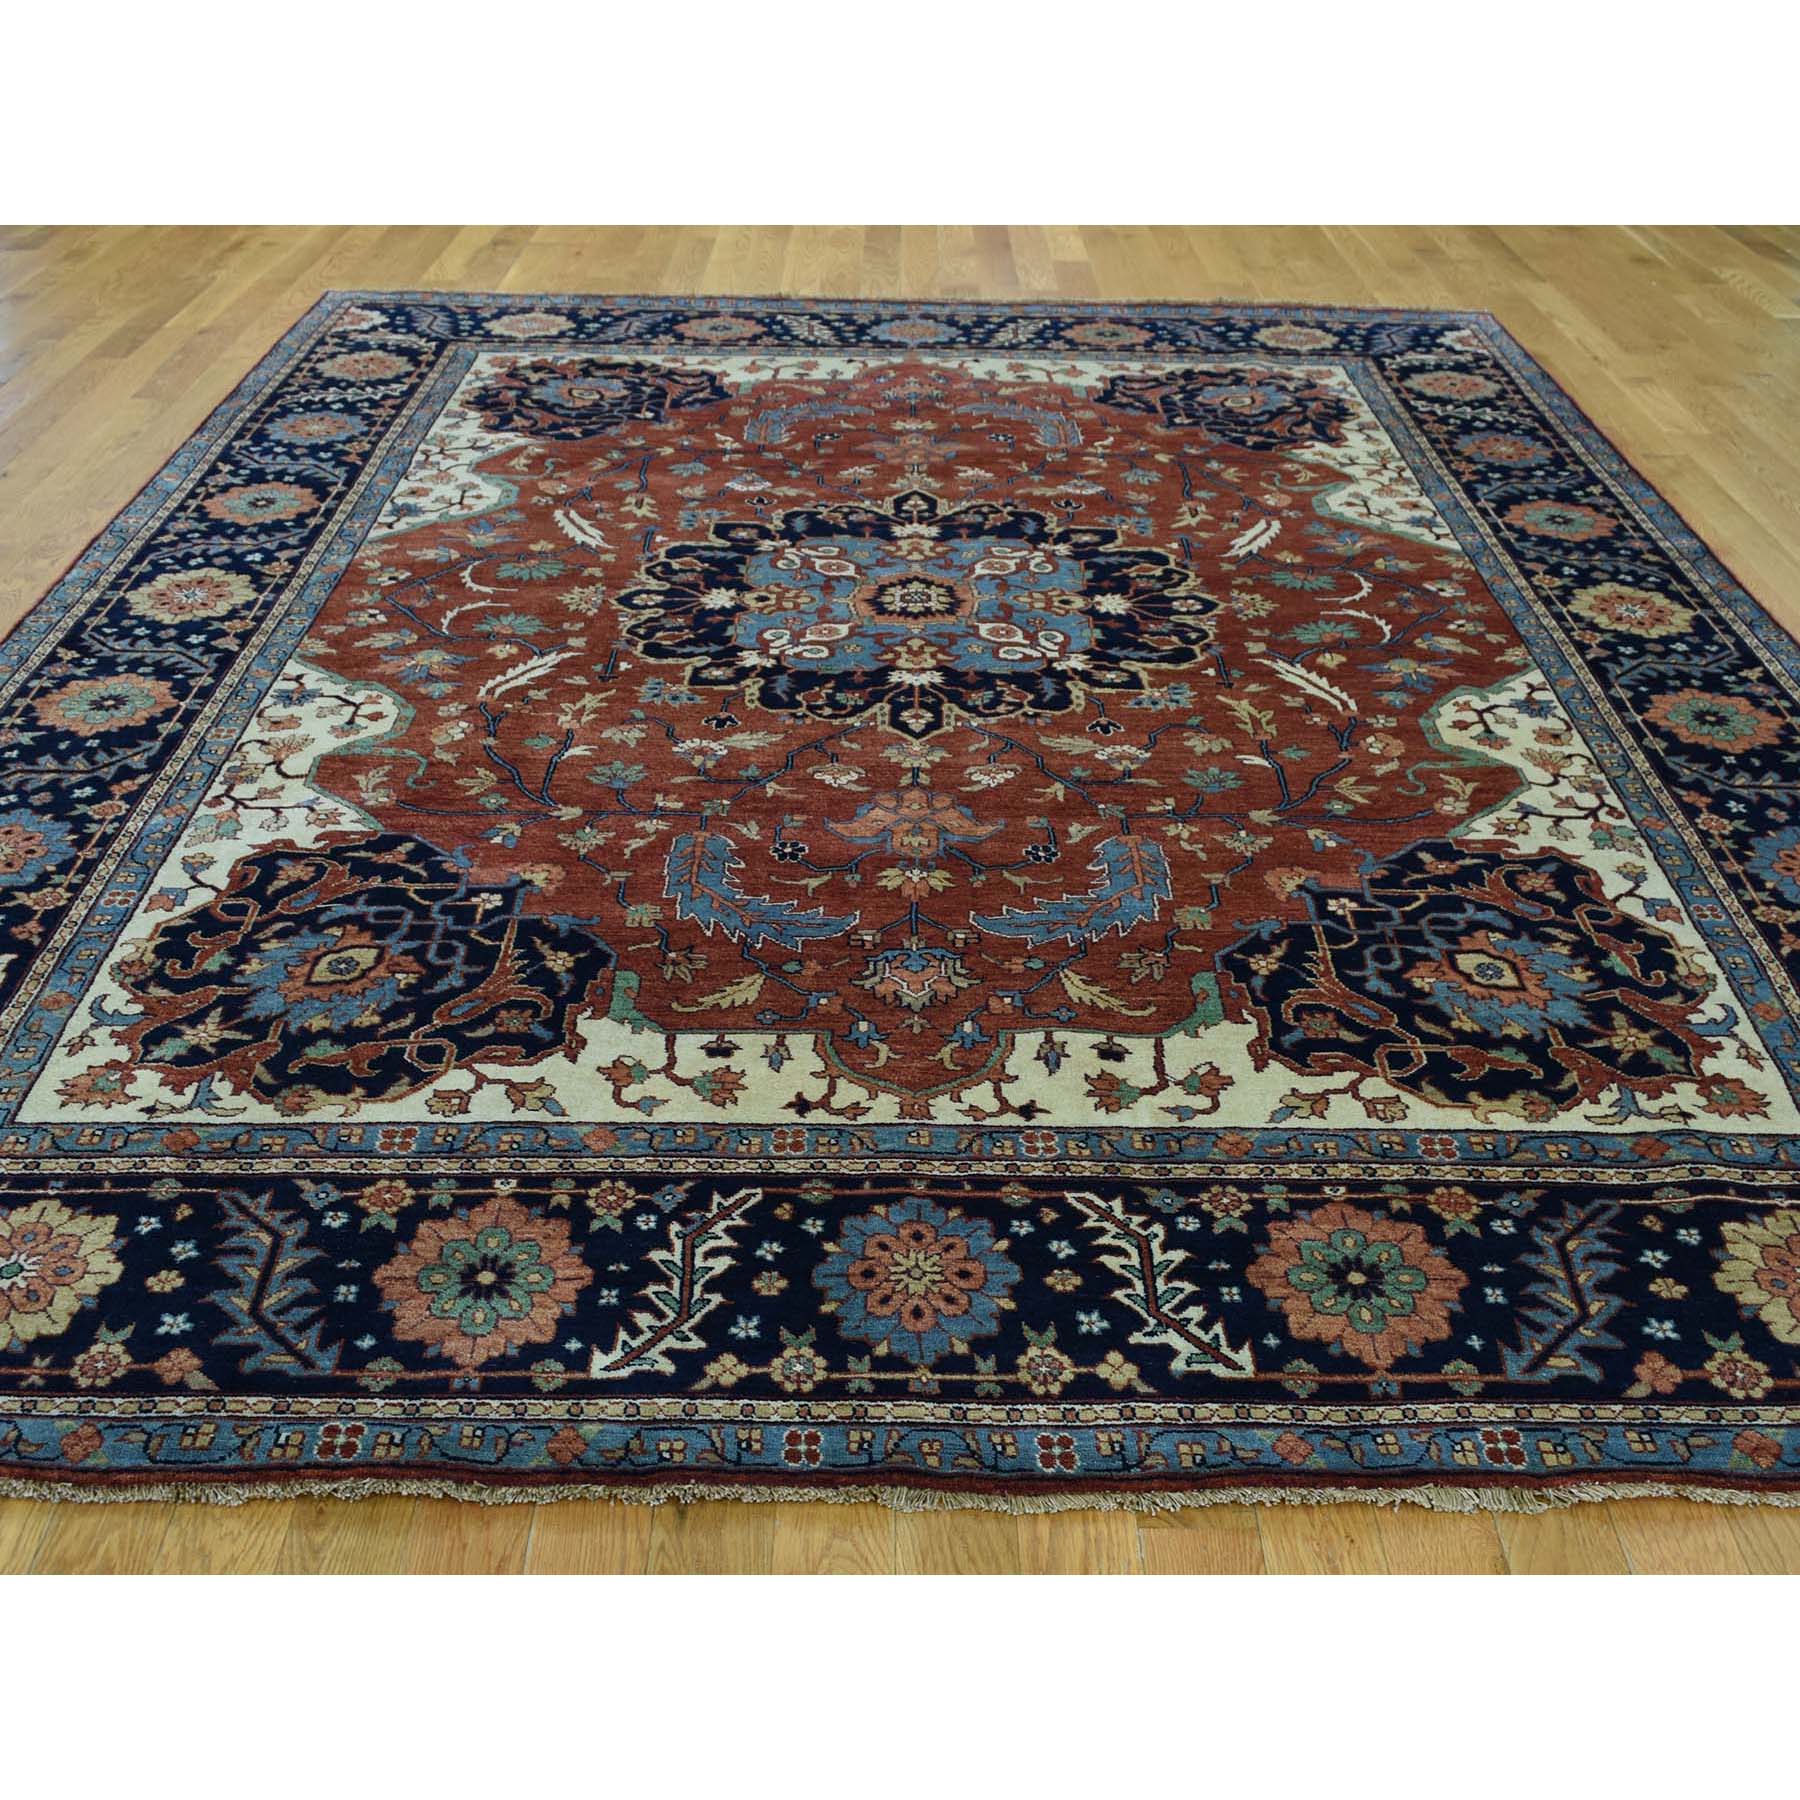 10-x13-10  Antiqued Heriz Re-creation Hand-Knotted Pure Wool Oriental Rug 